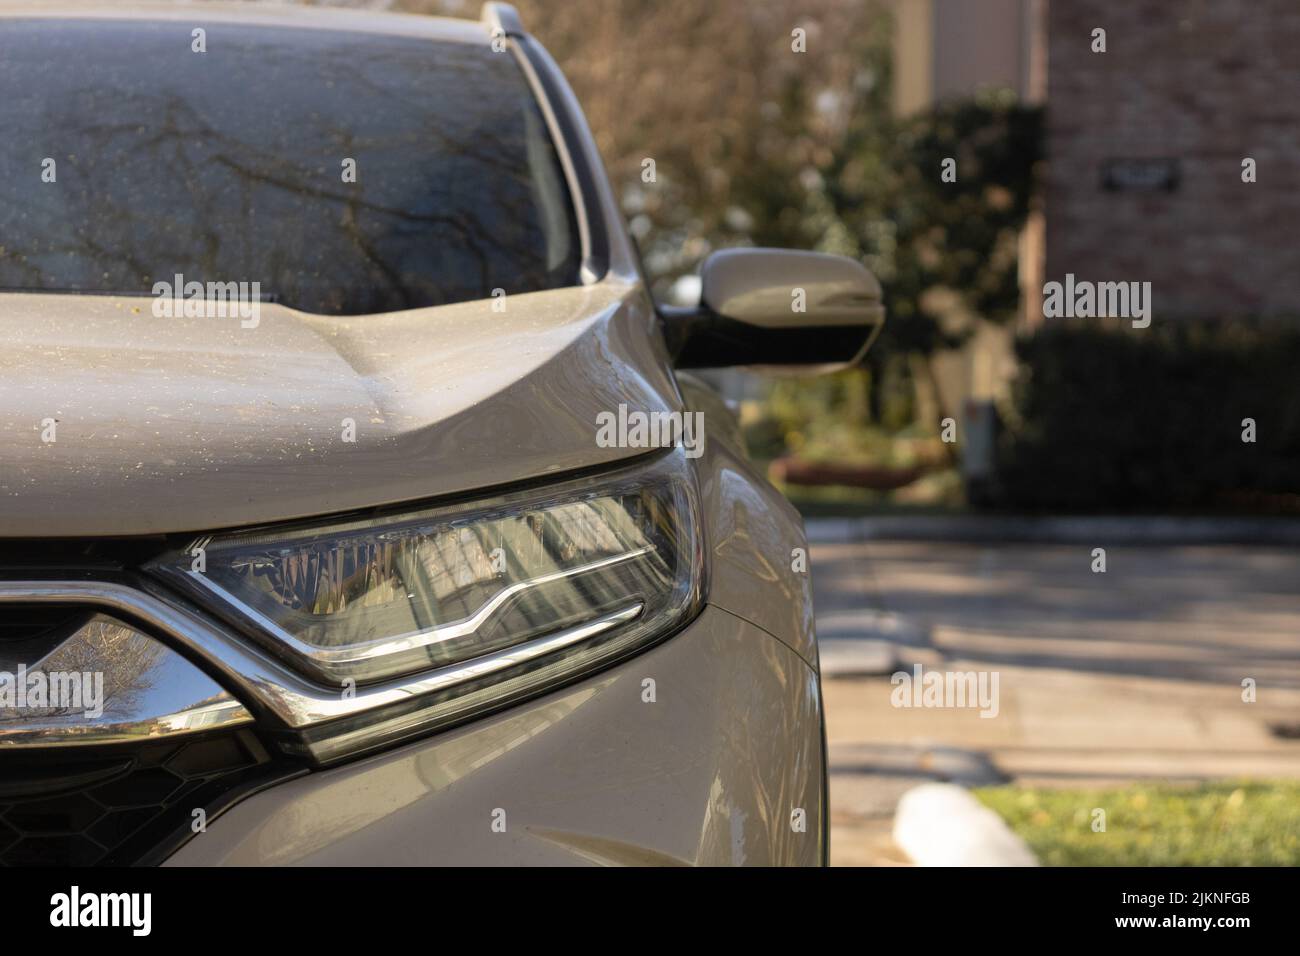 A suv sports utility vehicle in a small neighborhood Stock Photo